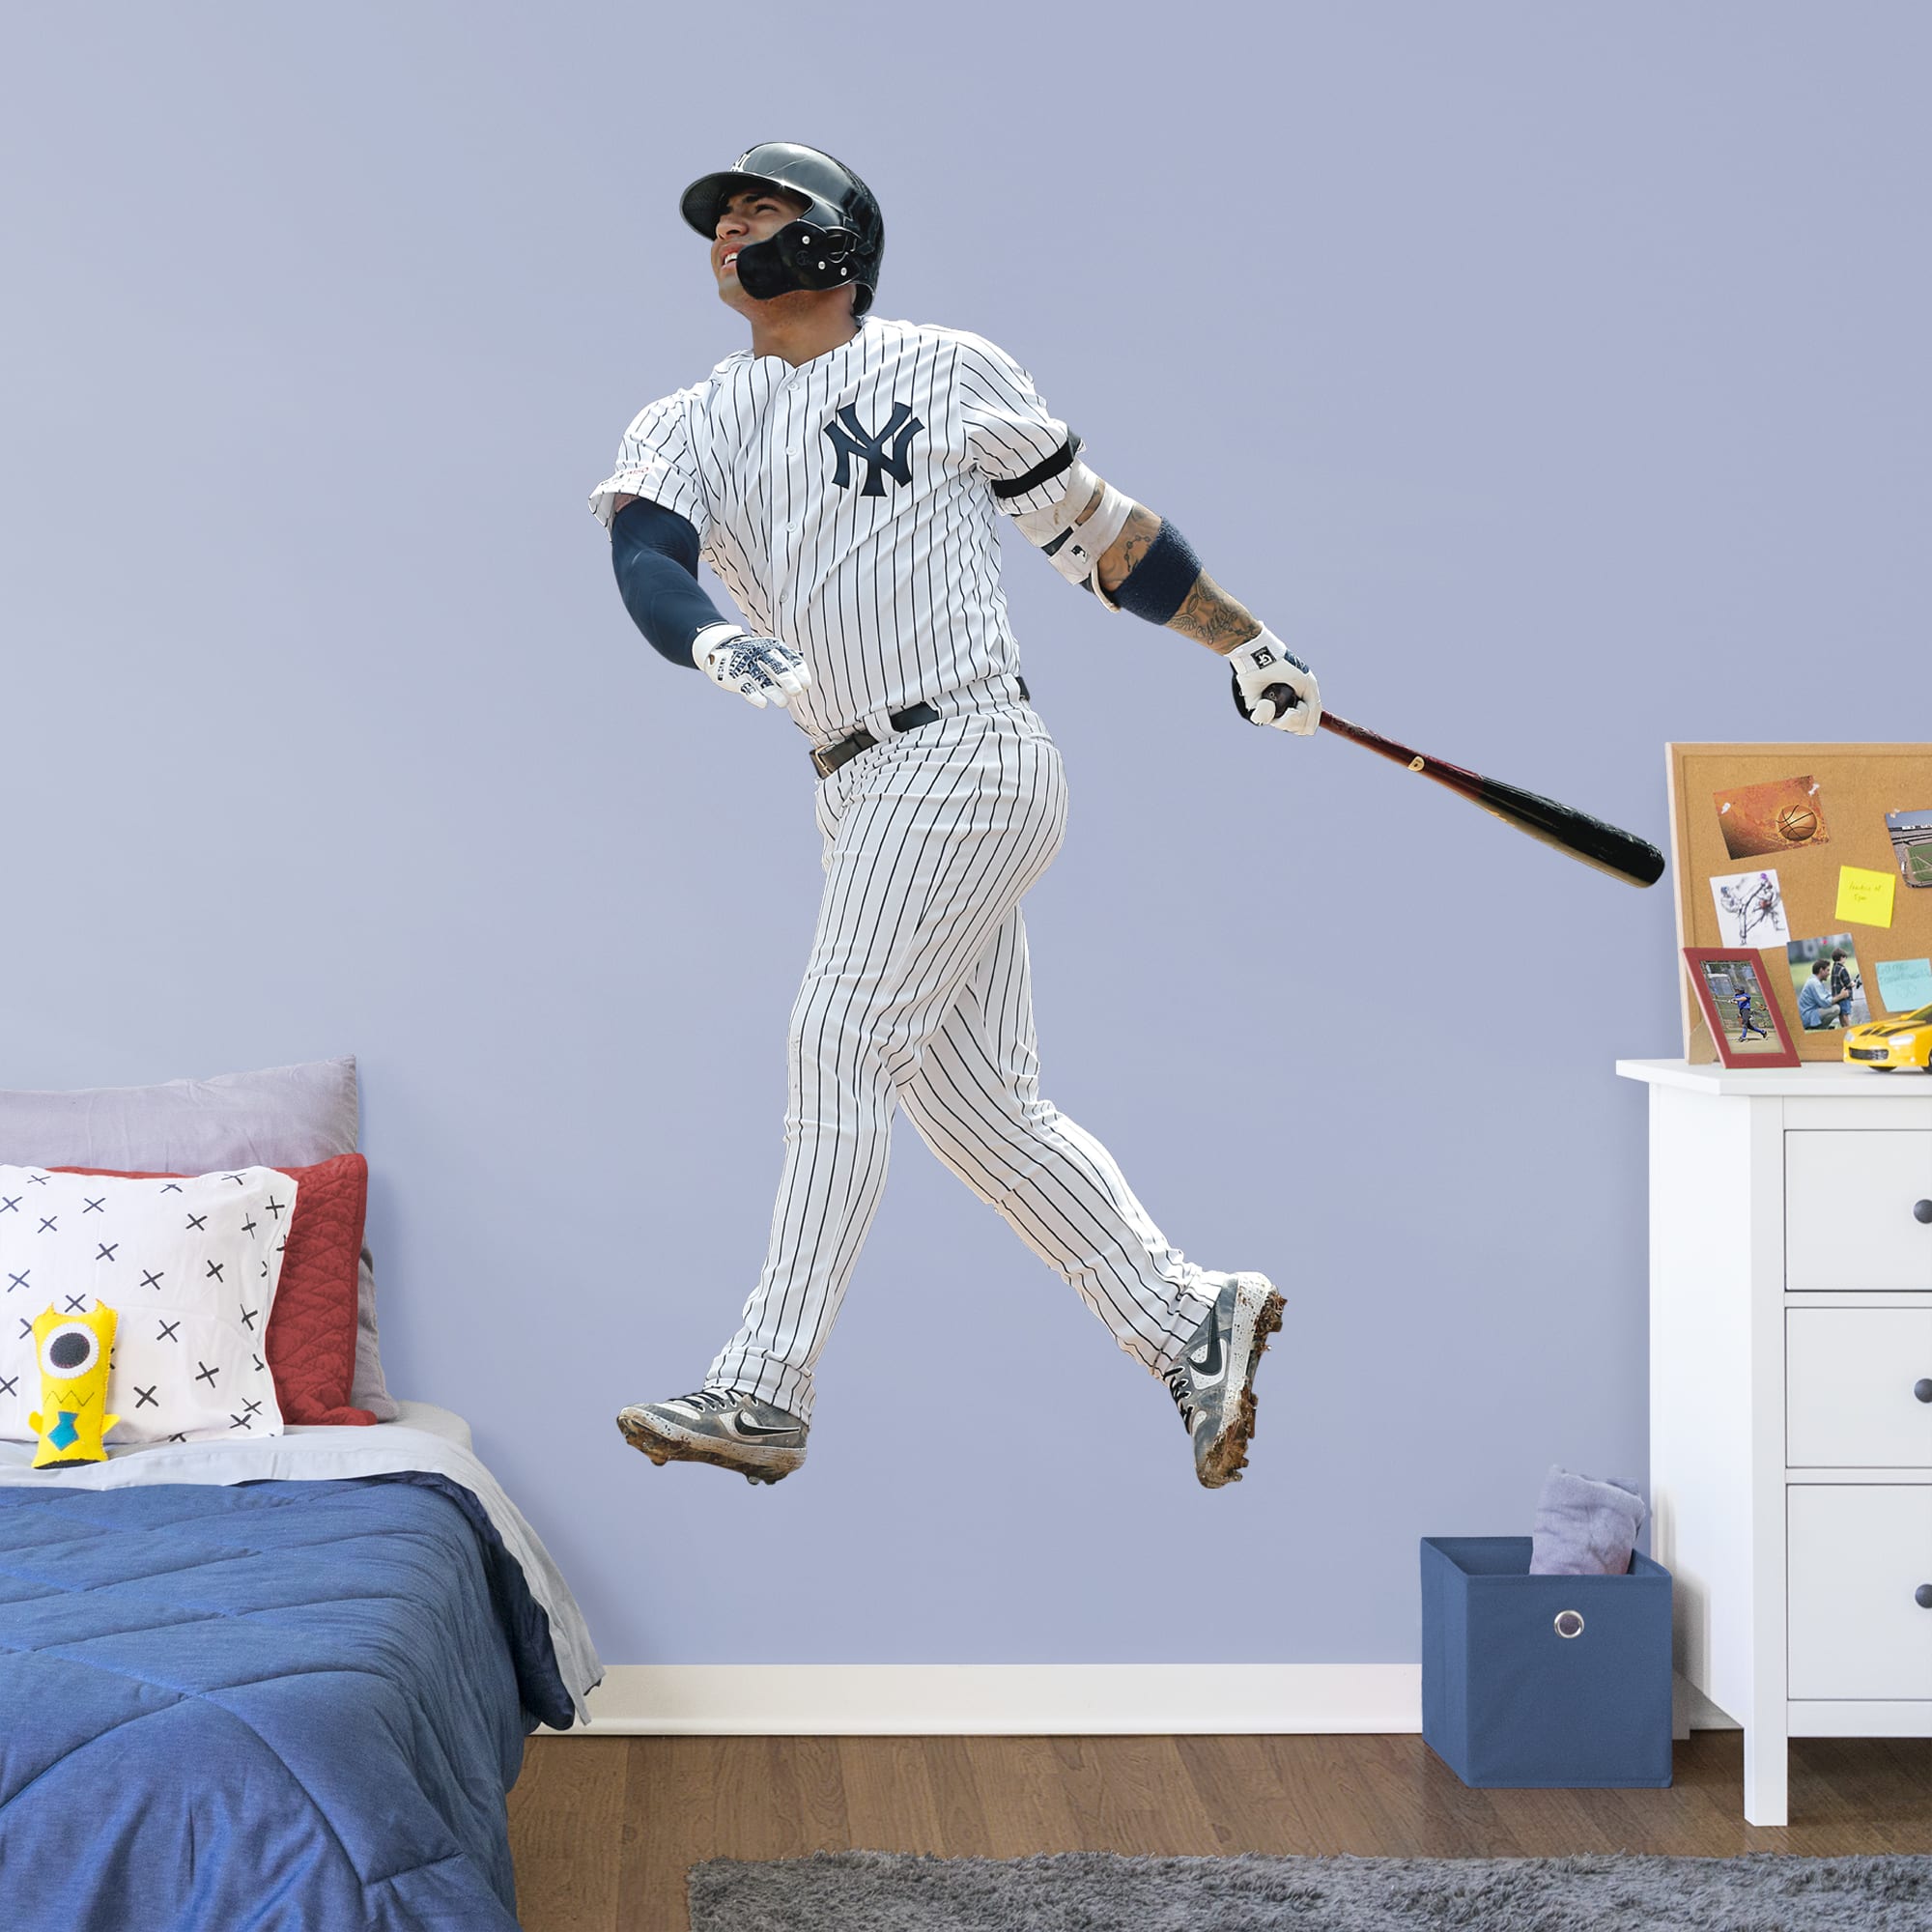 Gleyber Torres for New York Yankees - Officially Licensed MLB Removable Wall Decal Life-Size Athlete + 2 Decals (62"W x 77"H) by